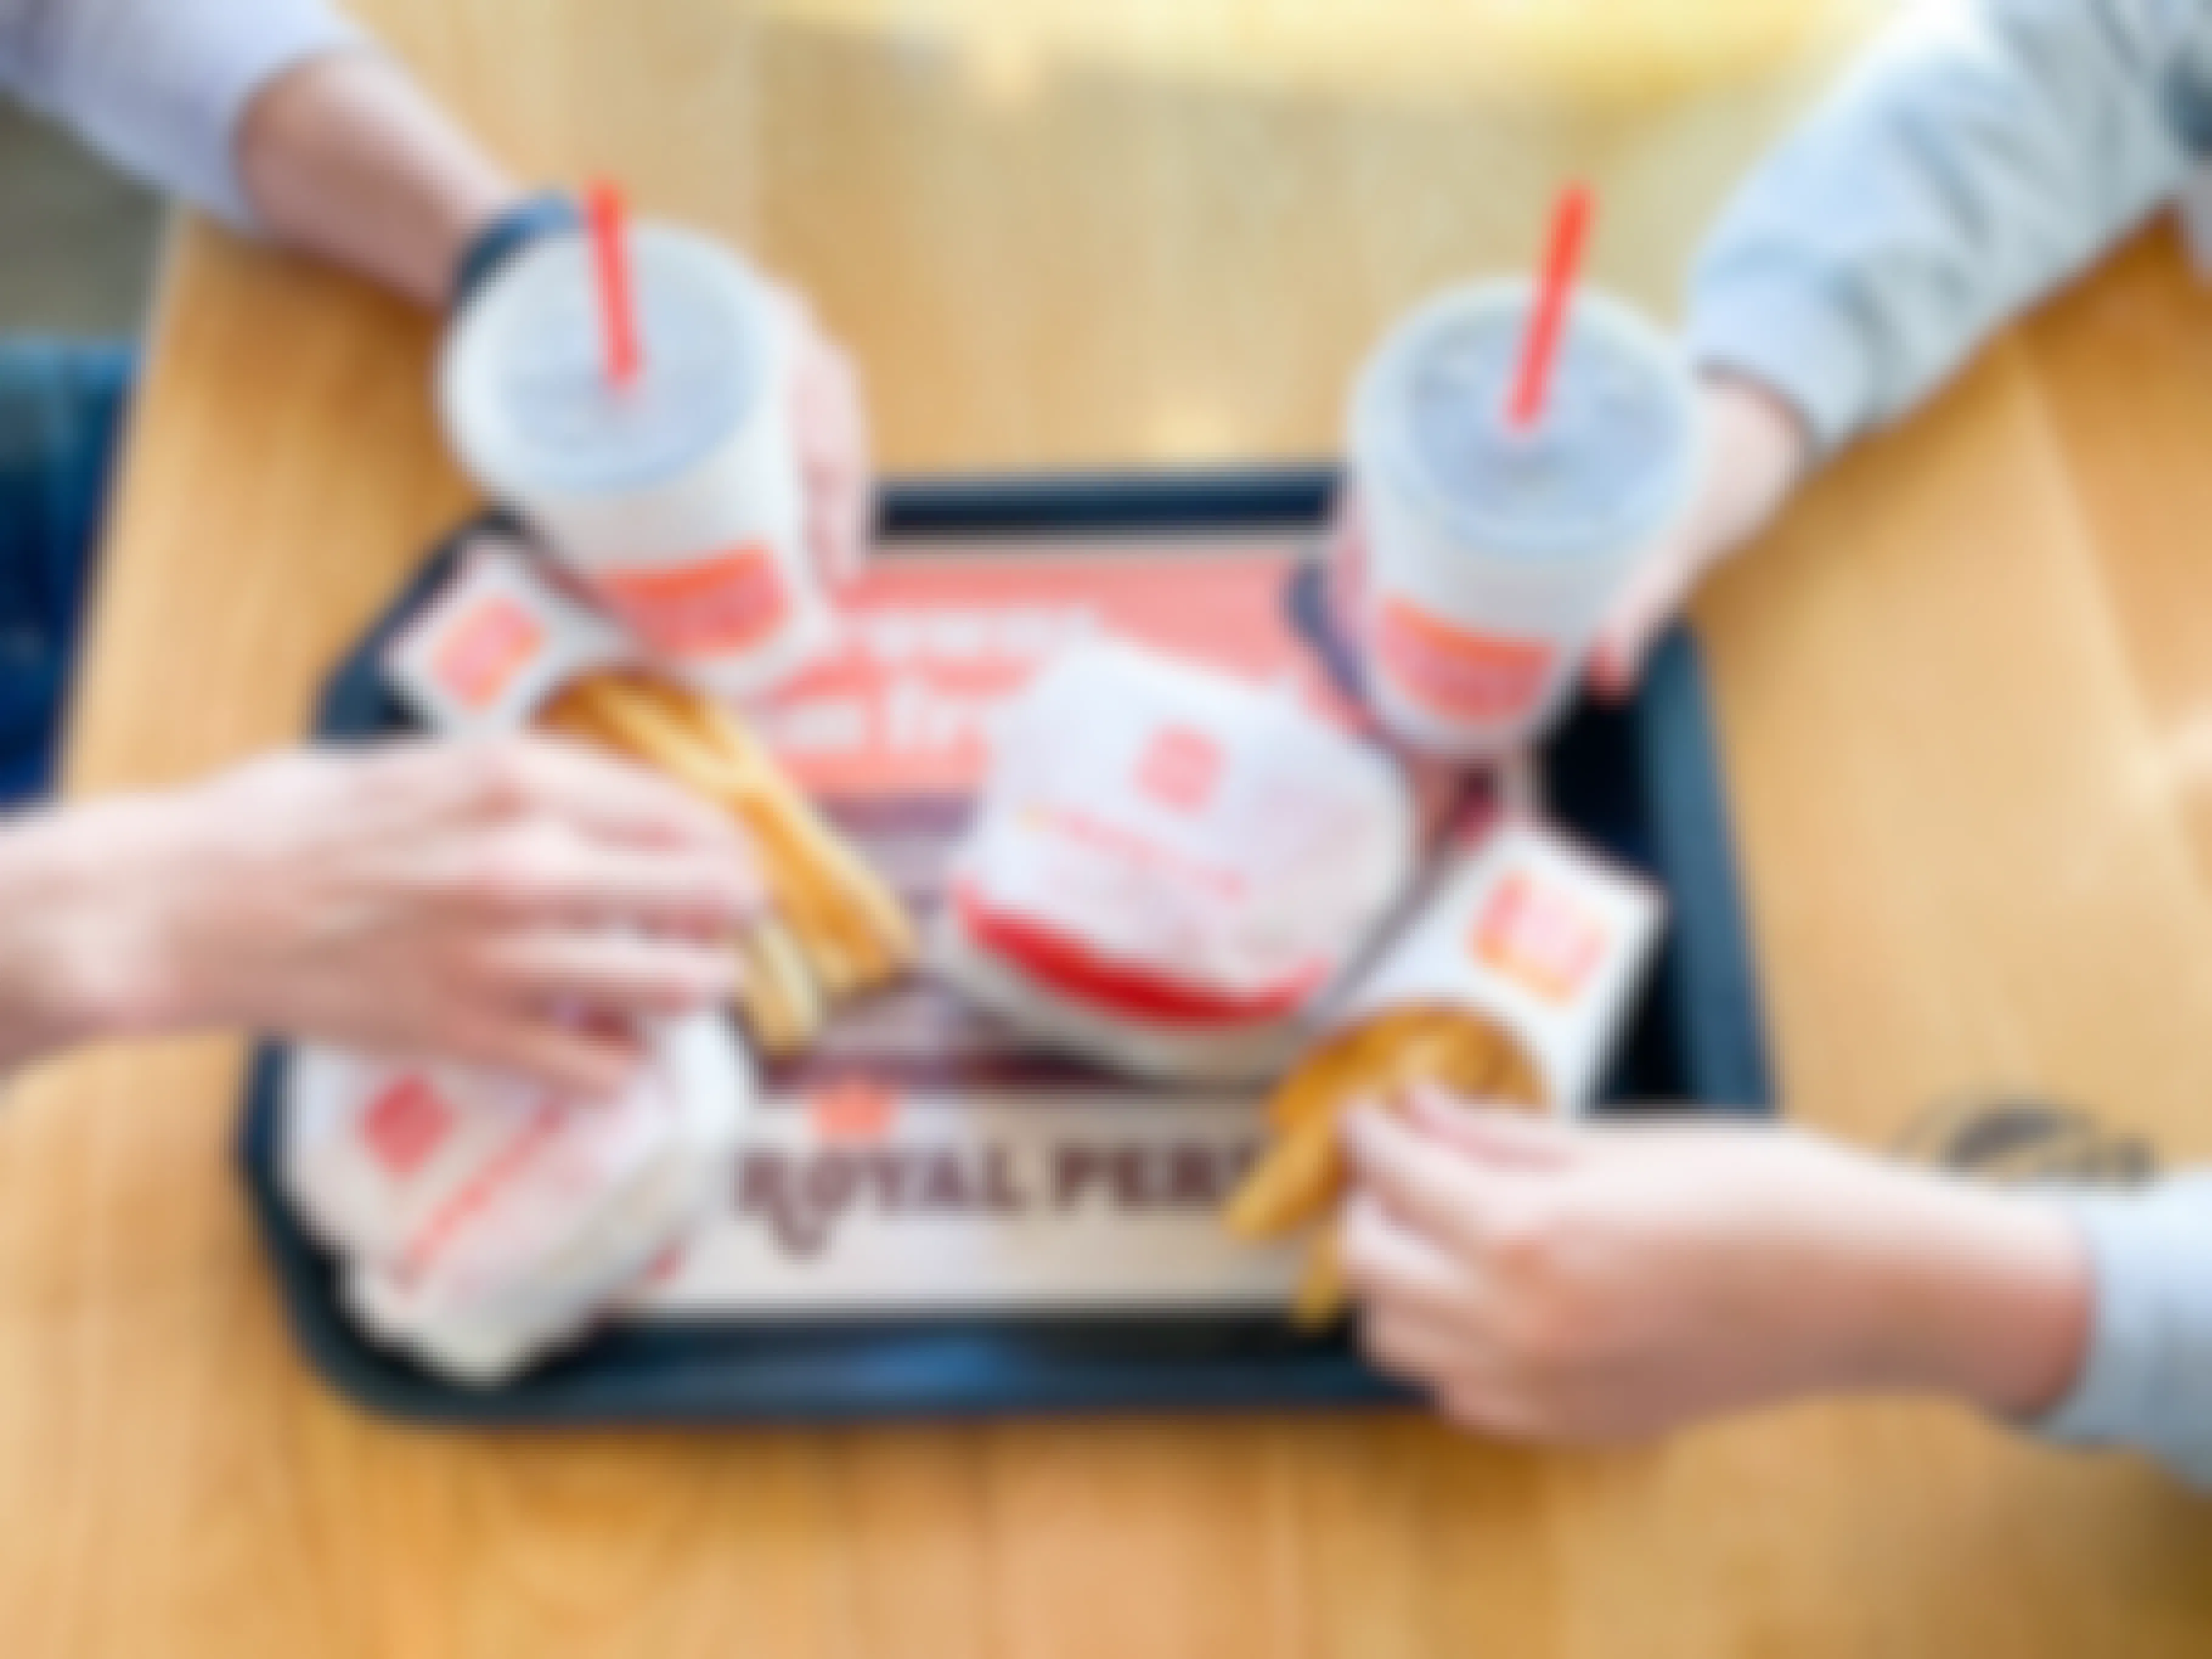 a tray with 2 burgers, 2 fries, and 2 drinks being grabbed by two people